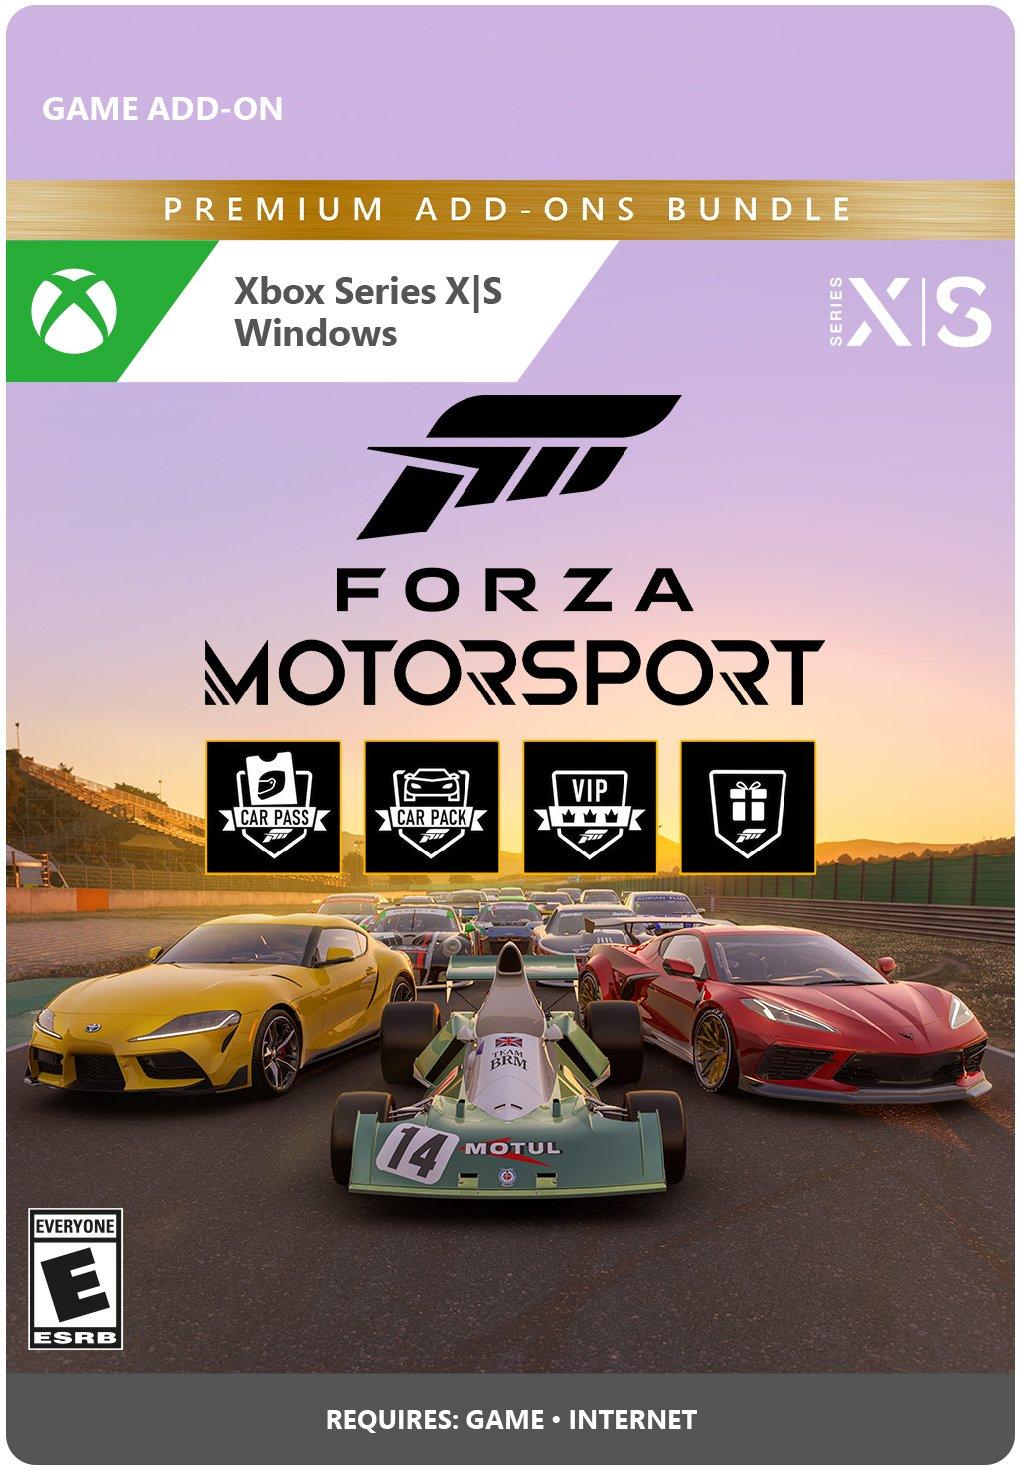 Forza Horizon Discount Sign Loctions! - Xbox Gaming - WeMod Community